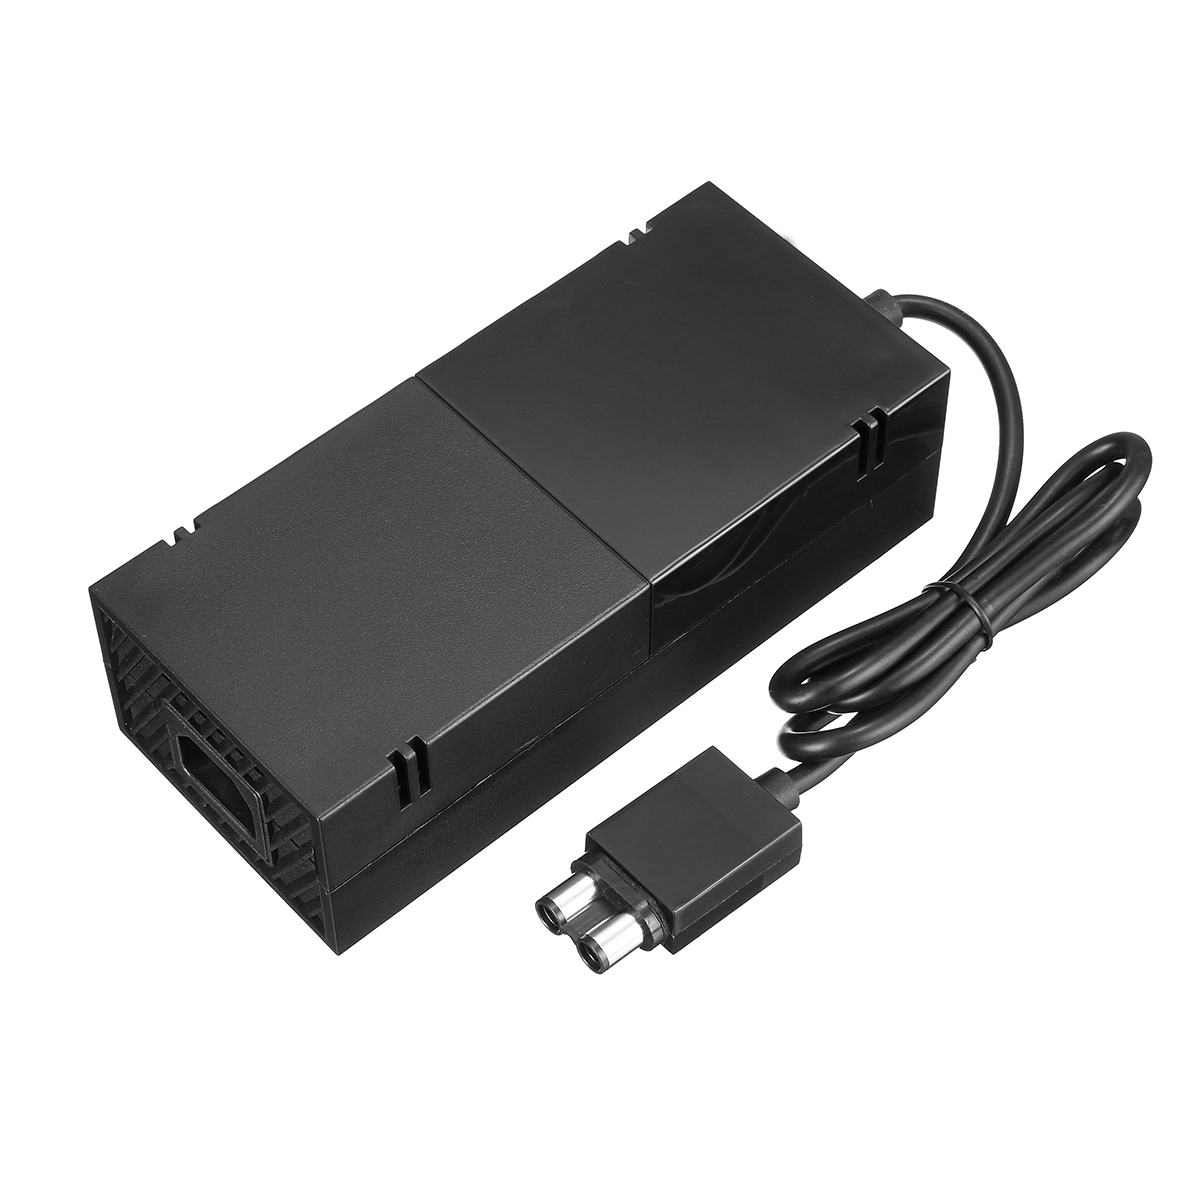 AC Adapter Charger Power Supply Cord Cable Unit for Microsoft Xbox One Console 24